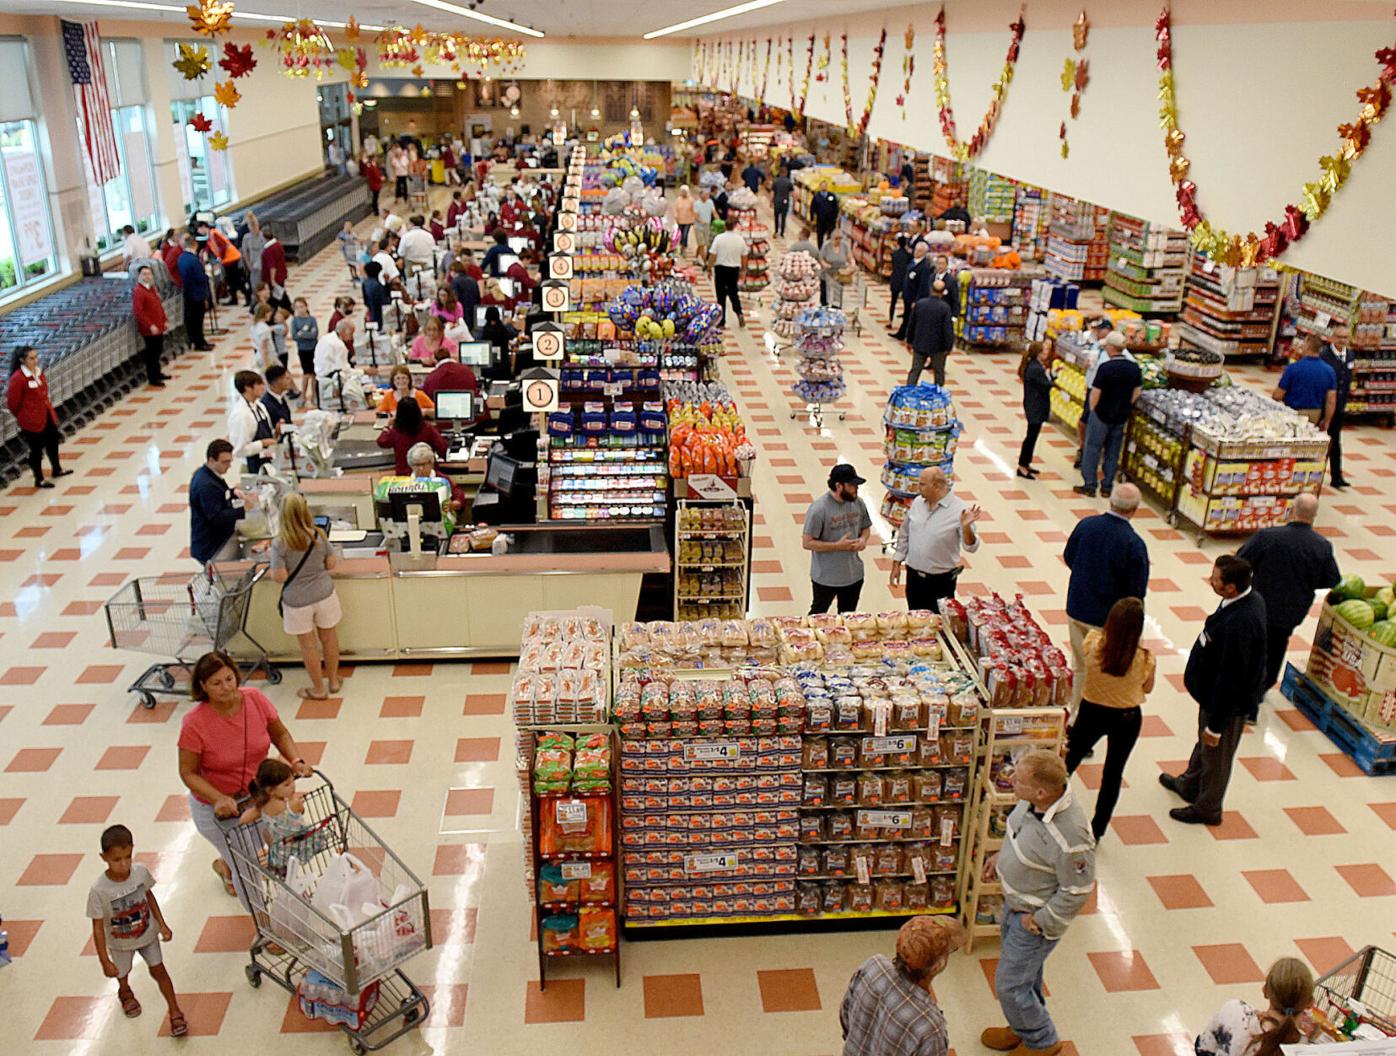 Market Basket to open locations in North Conway and Topsham, Maine